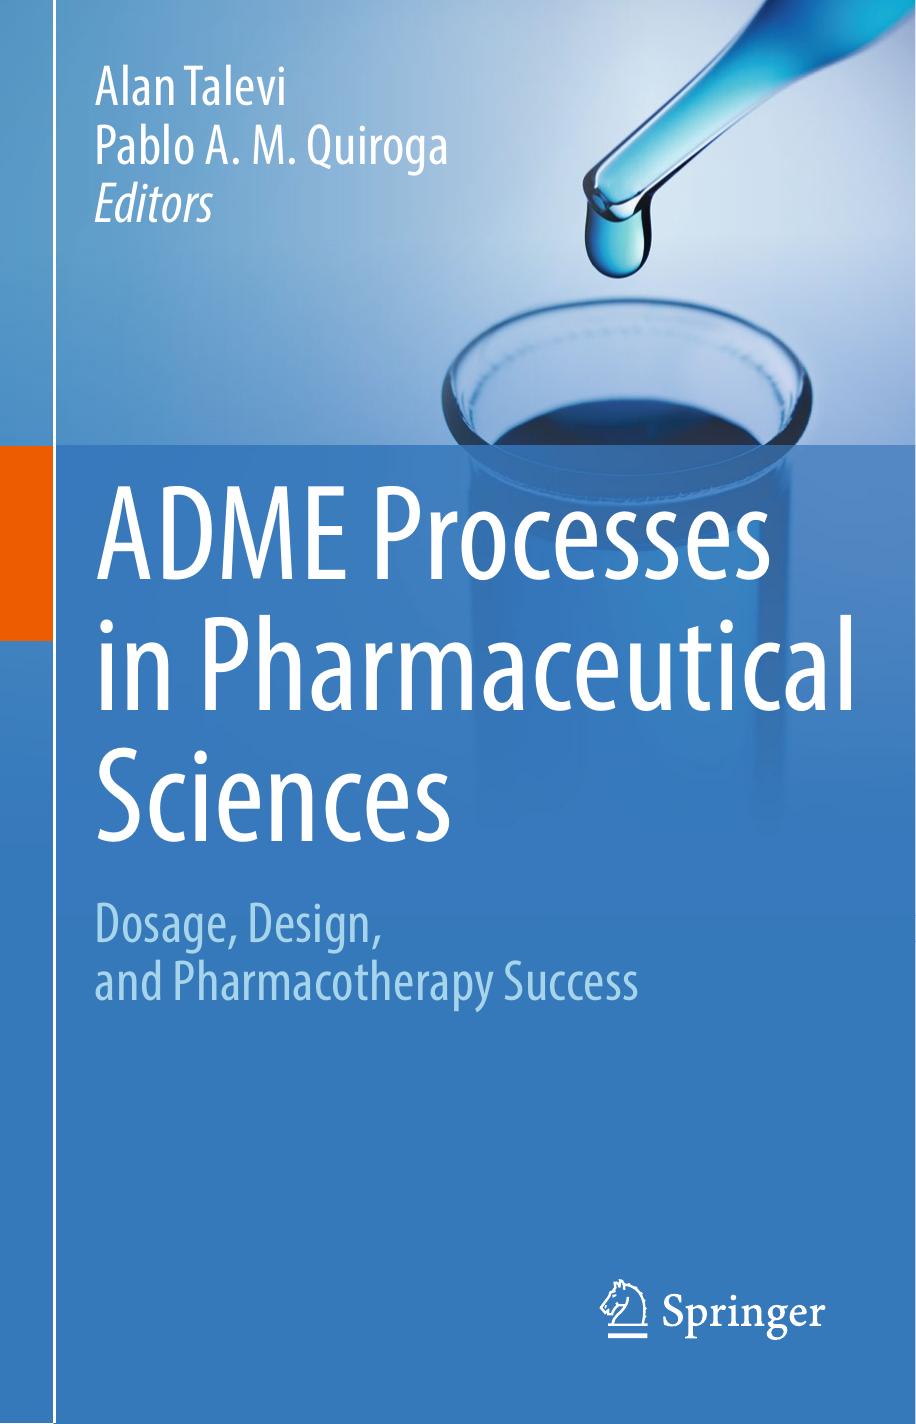 ADME Processes in Pharmaceutical Sciences Dosage, Design, and Pharmacotherapy Success 2018